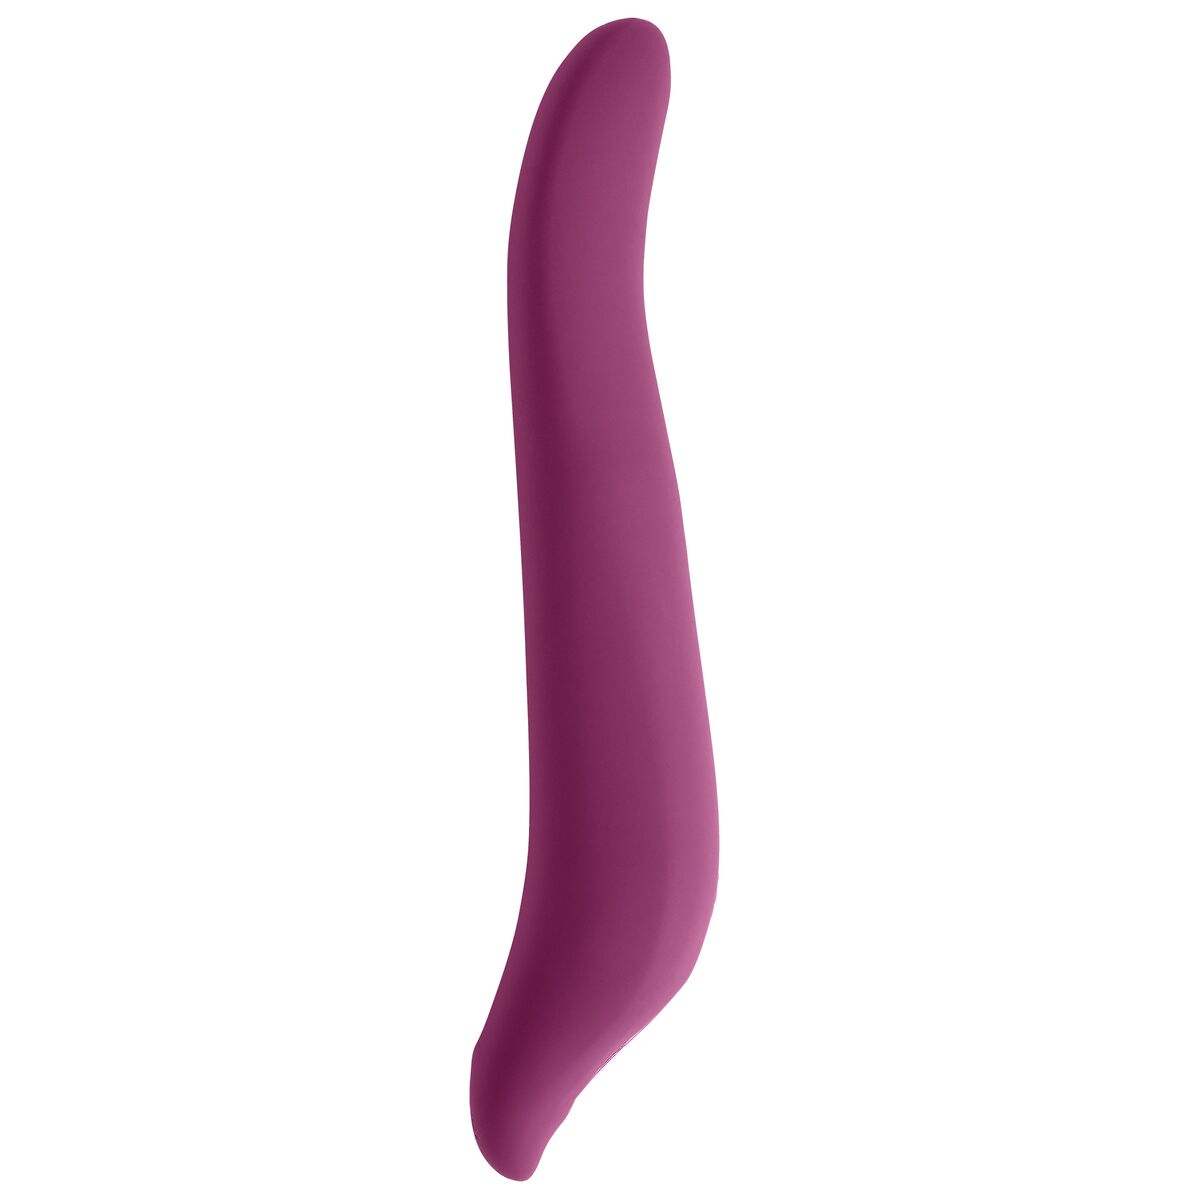 CLOUD 9 SWIRL TOUCH PLUM DUAL FUNCTION SWIRLING & VIBRATING STIMULATOR - Click Image to Close